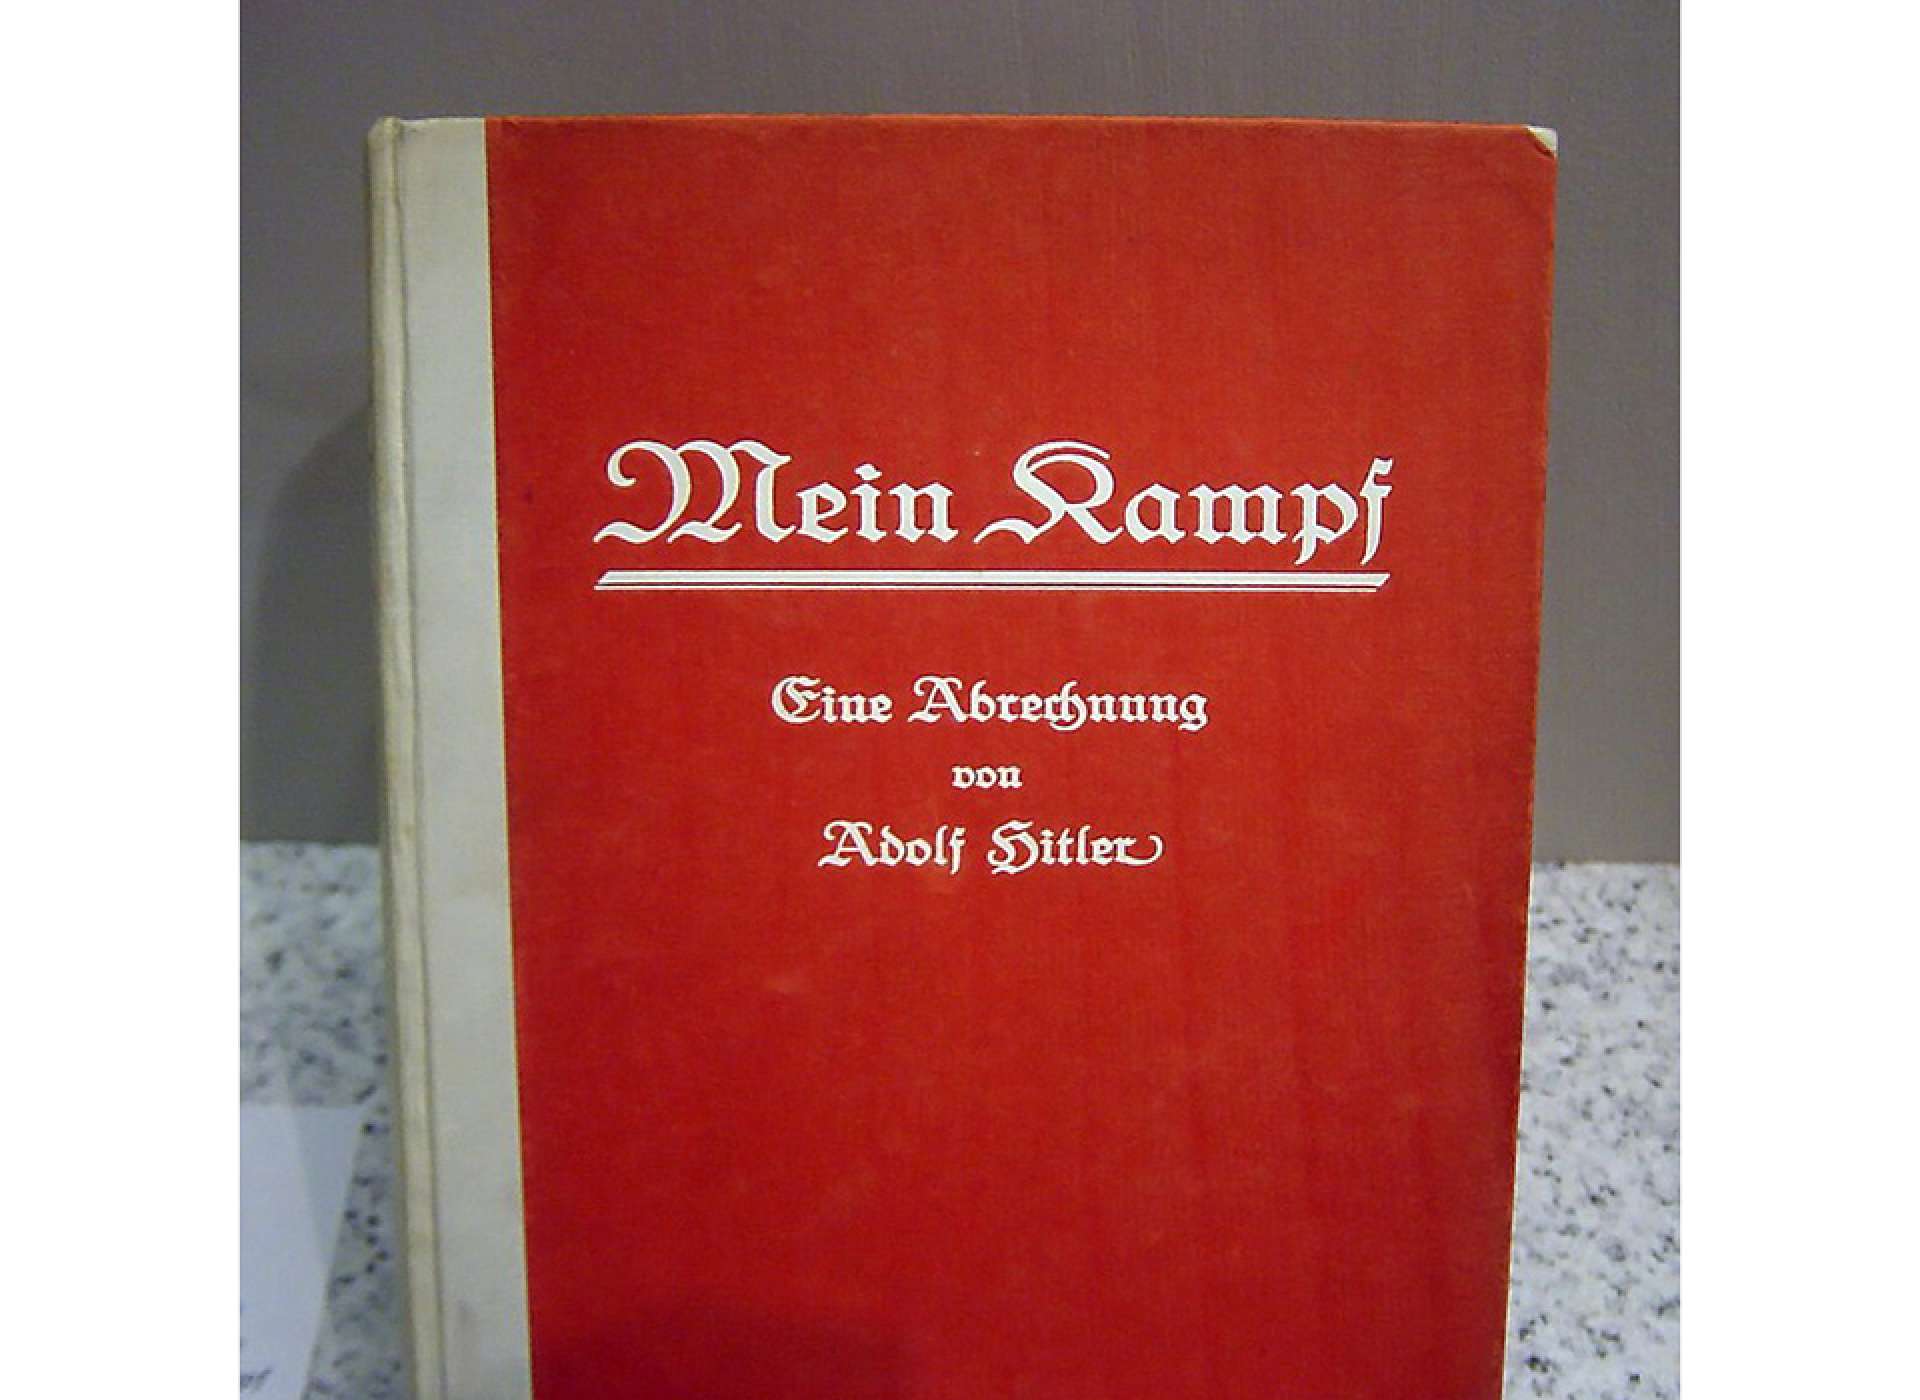 First Edition of Mein Kampf (1925)